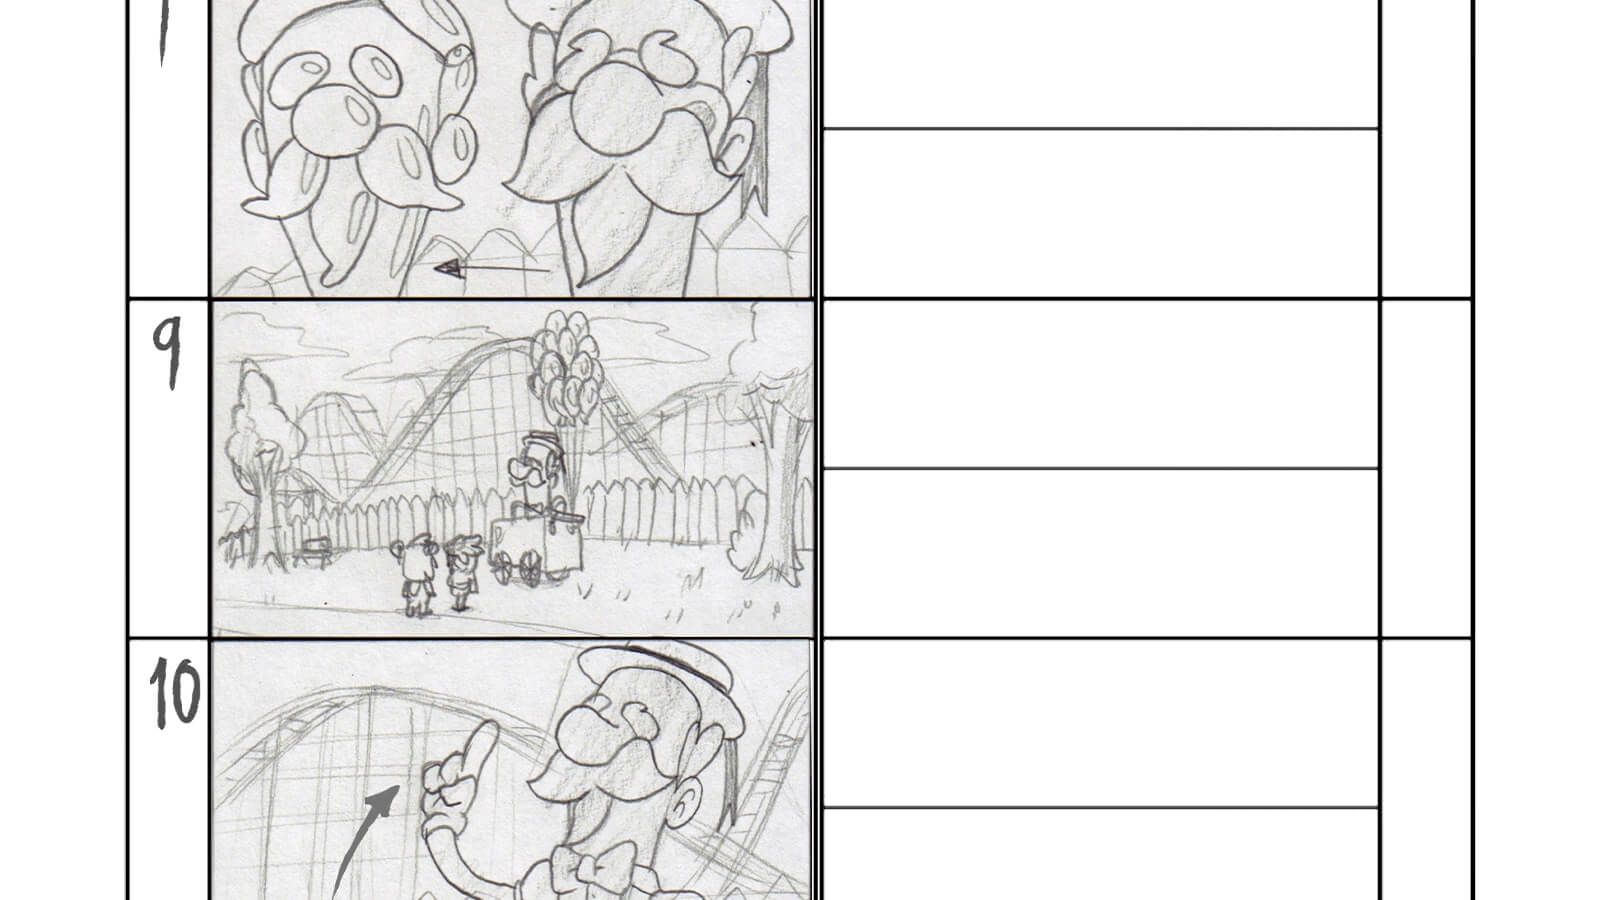 Storyboard concepts featuring three slides of the old carnival balloonman